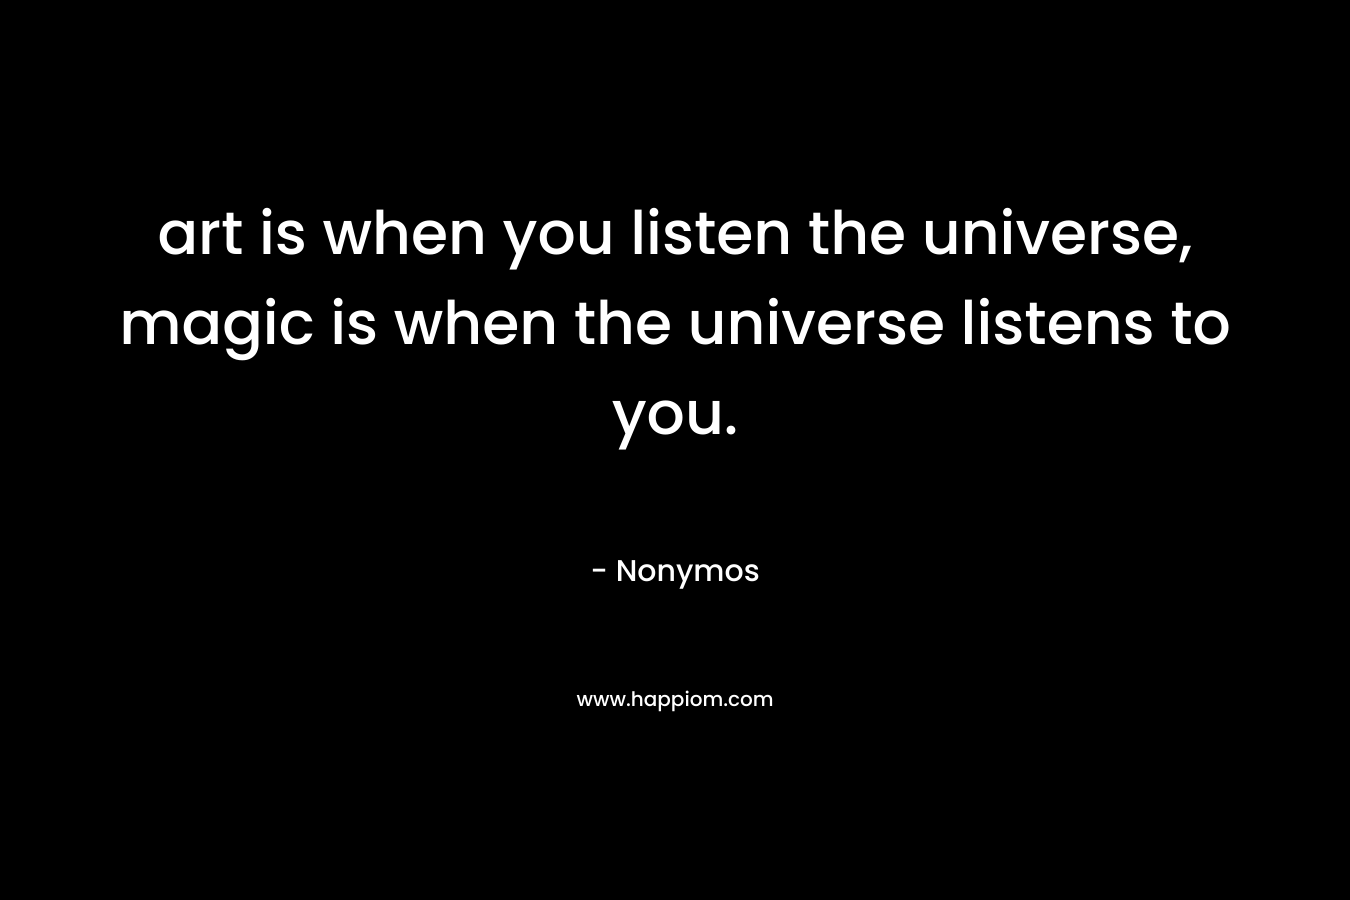 art is when you listen the universe, magic is when the universe listens to you. – Nonymos